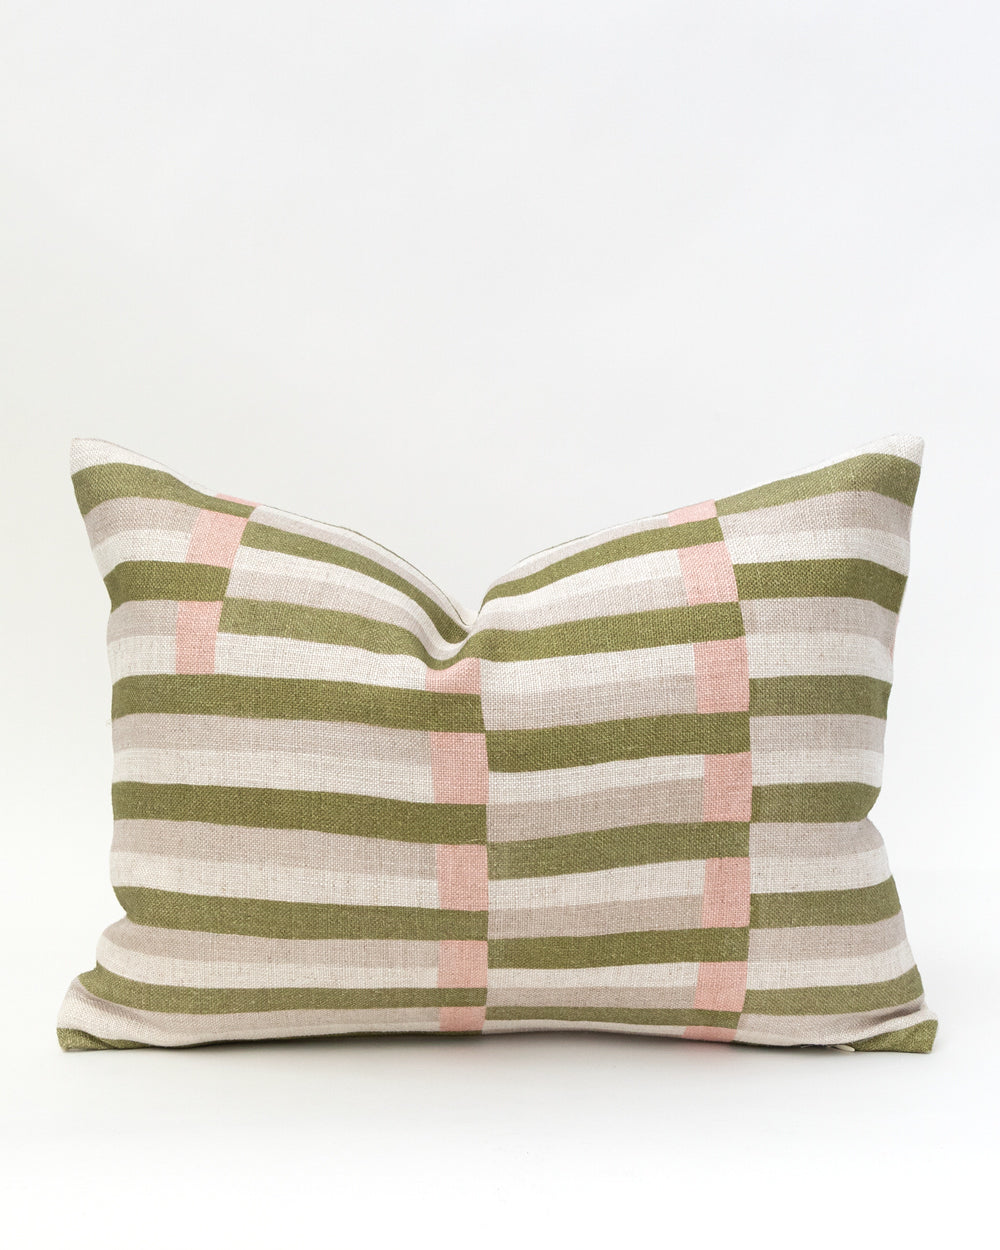 Anni Pillow Cover, Olive